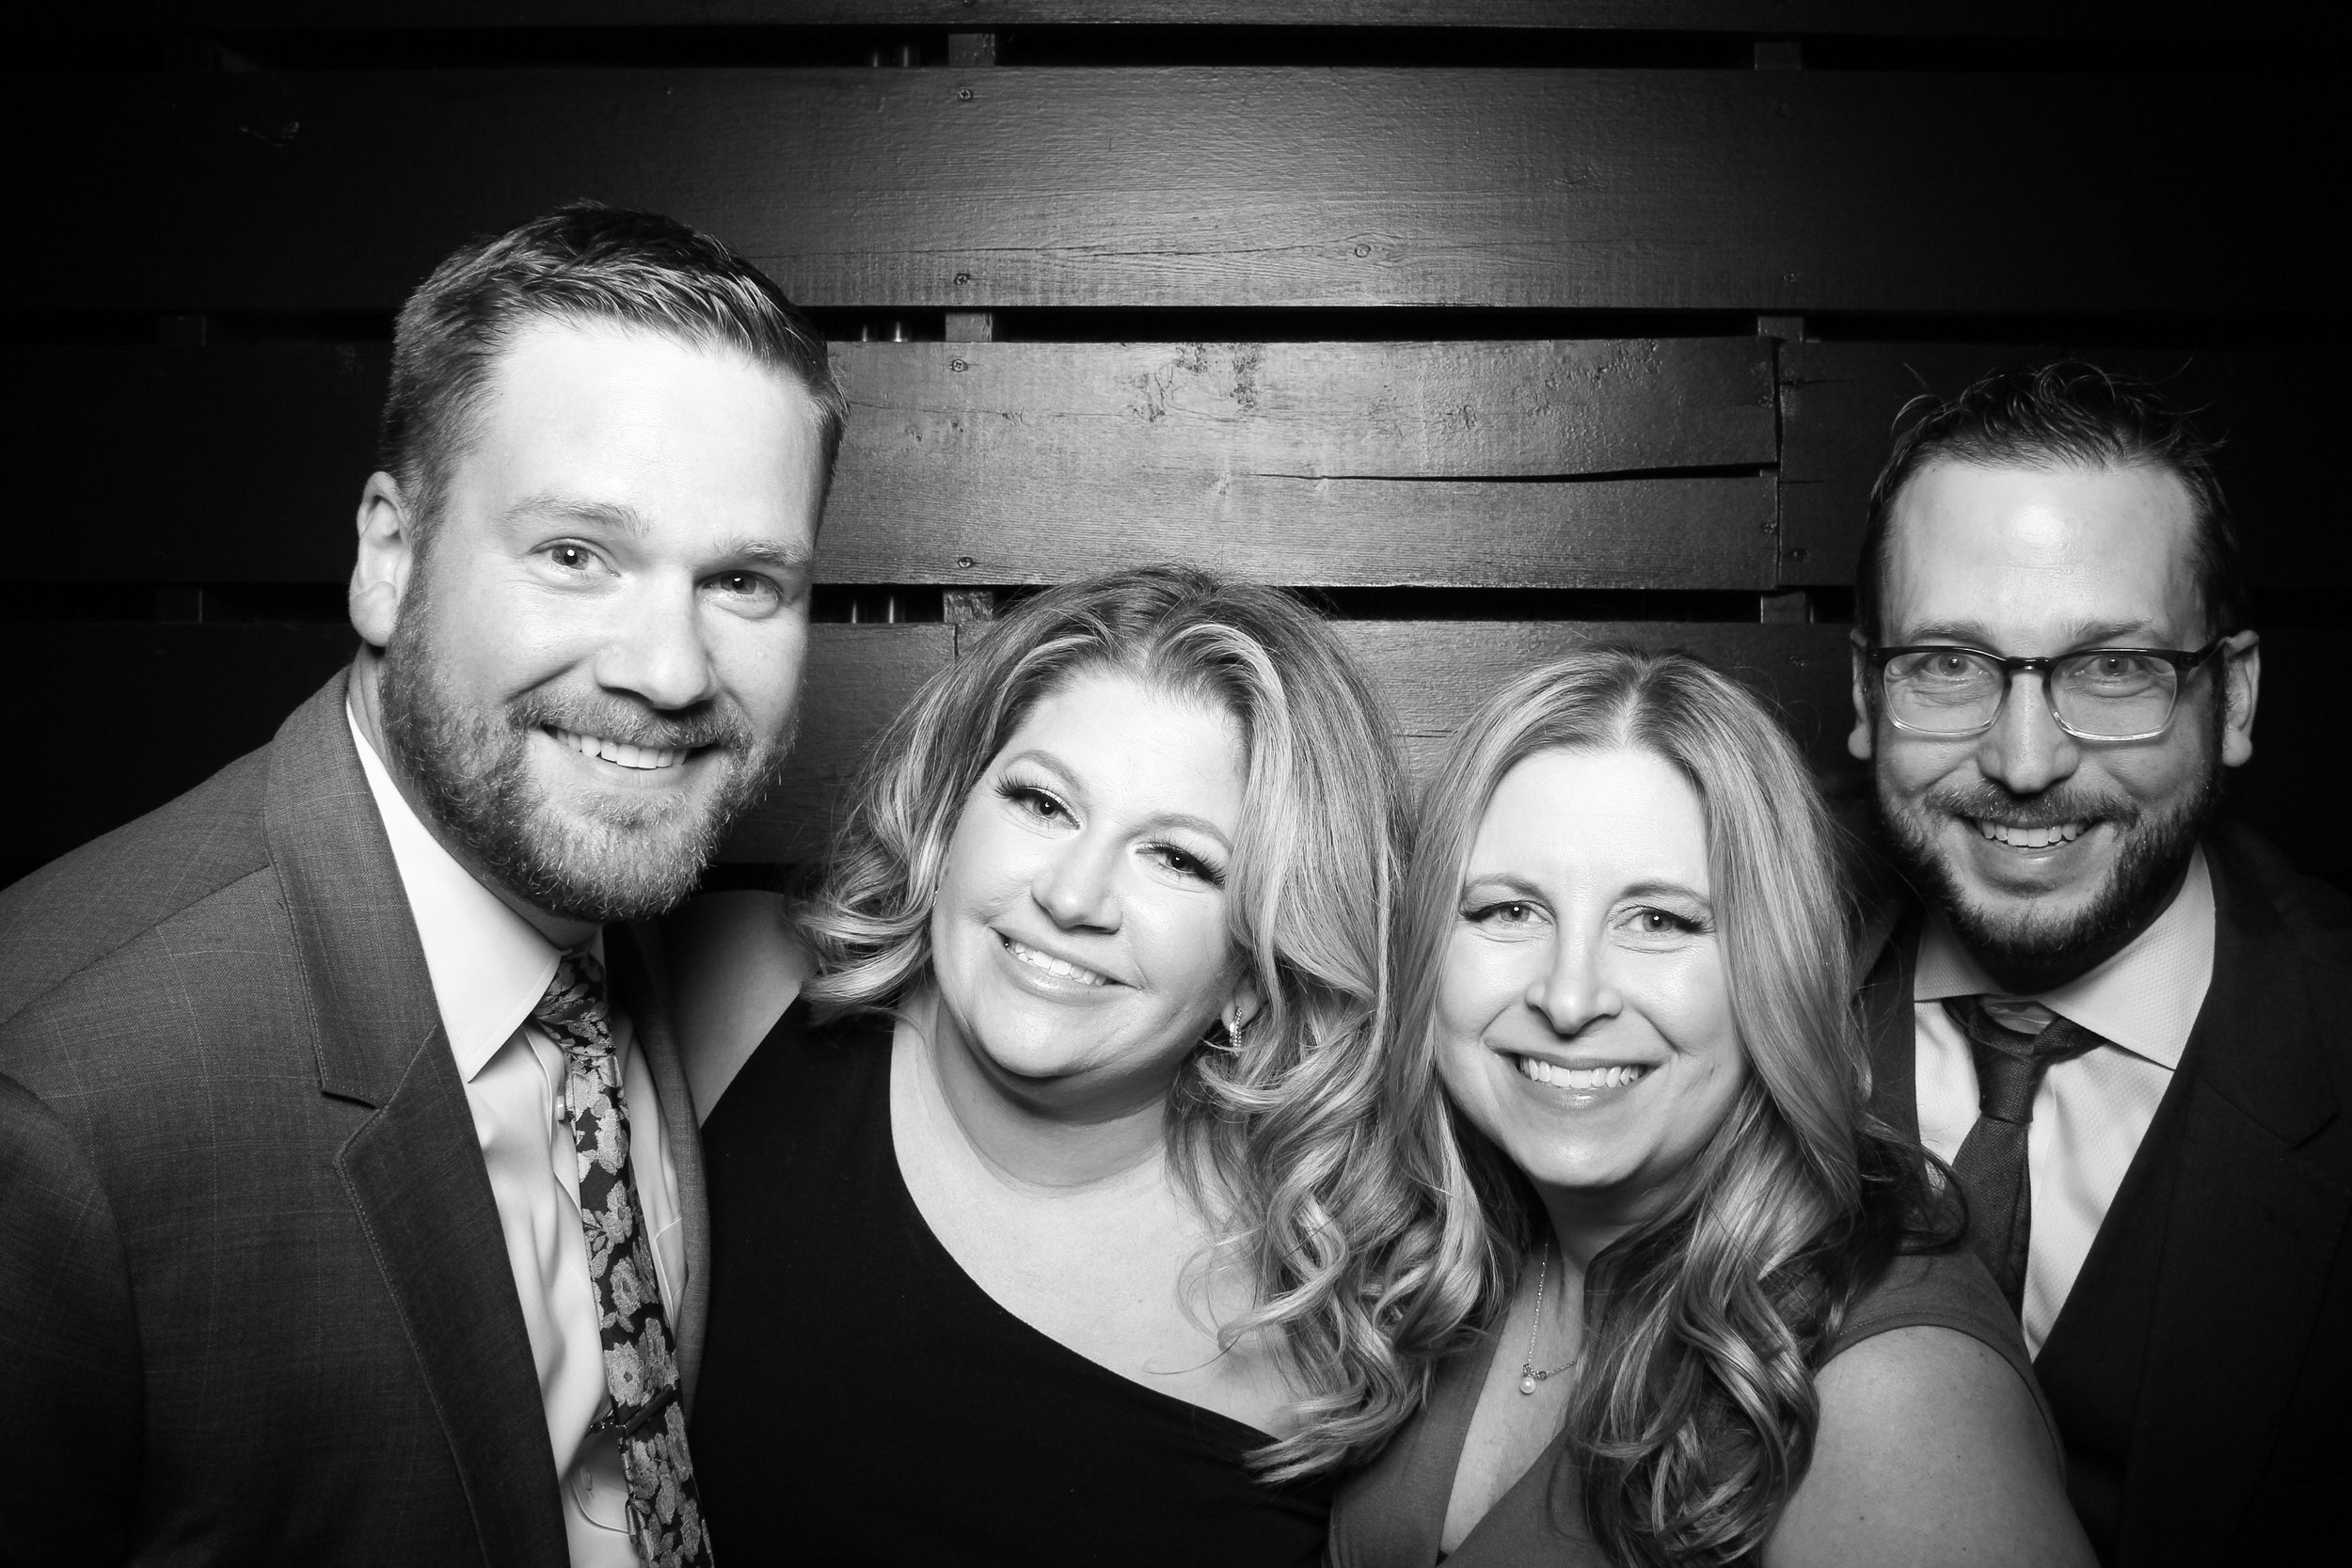 Fotio_Photo_Booth_Chicago_Winery_Clark_Street_Party_Family_Fun_Terrace_Superfans_River_North_07.jpg